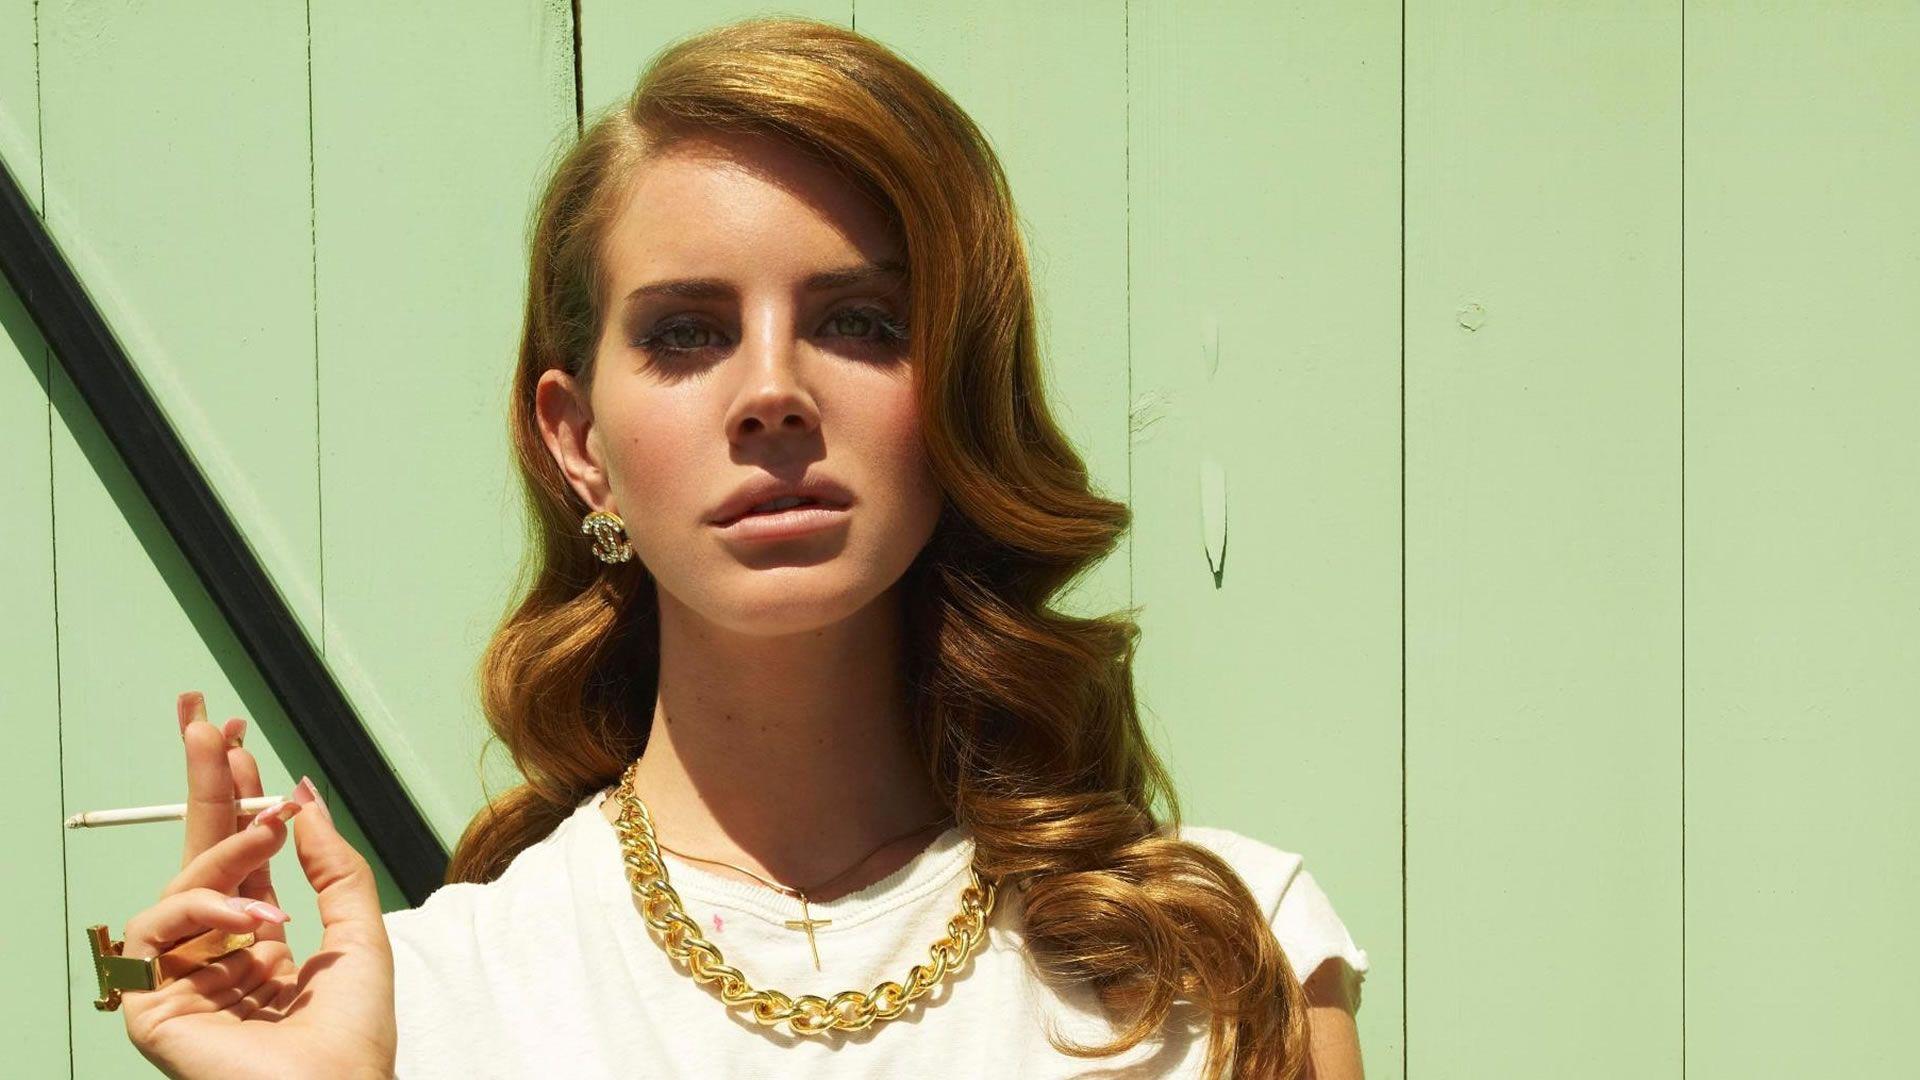 Lana Del Rey Wallpaper, Facts and HD Gallery